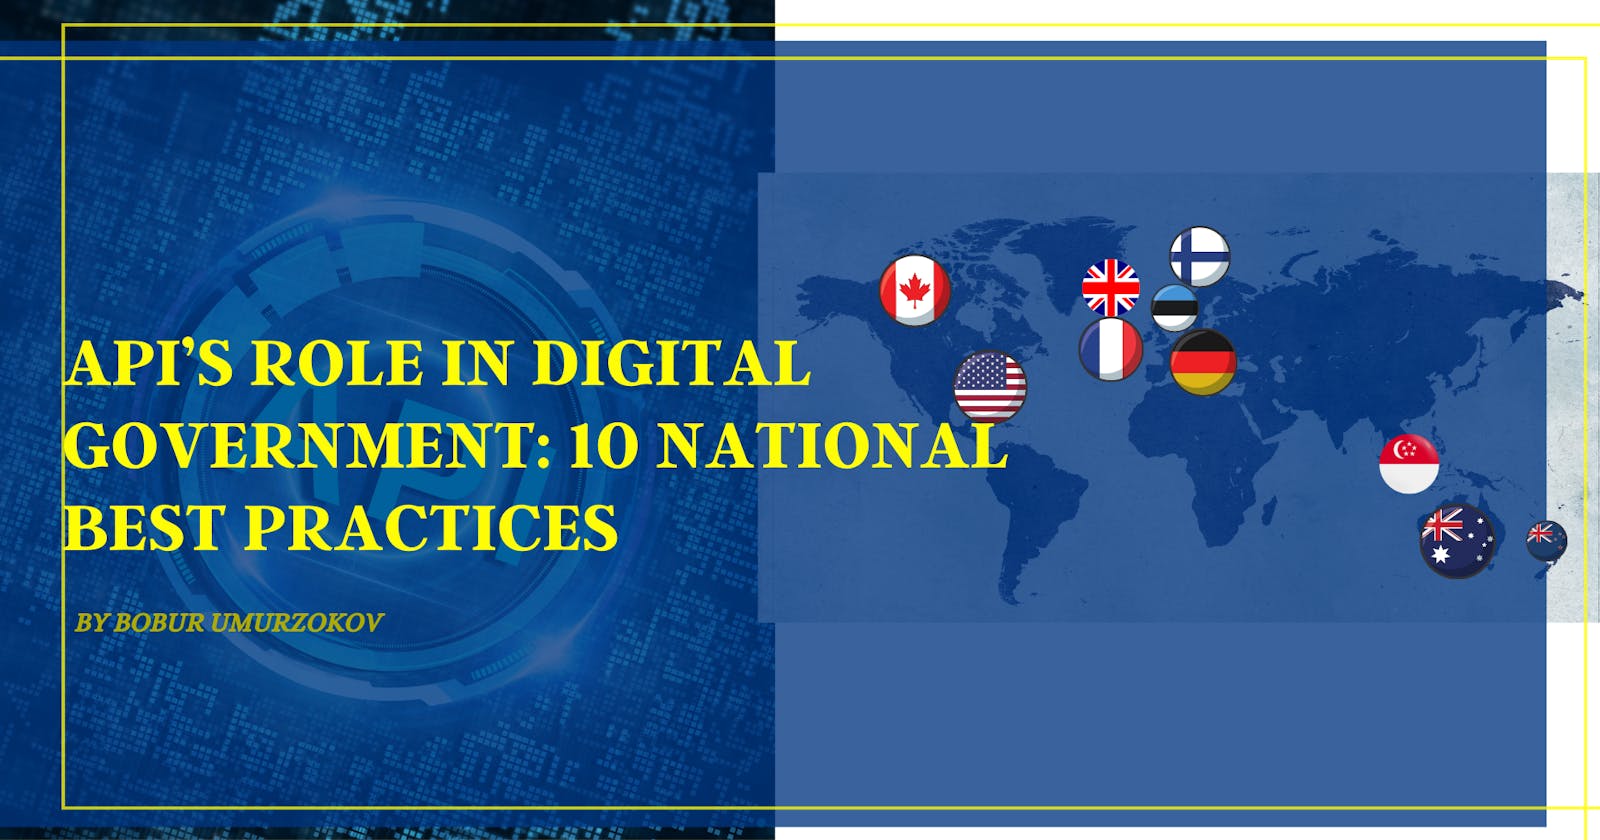 API’s role in digital government: 10 national best practices